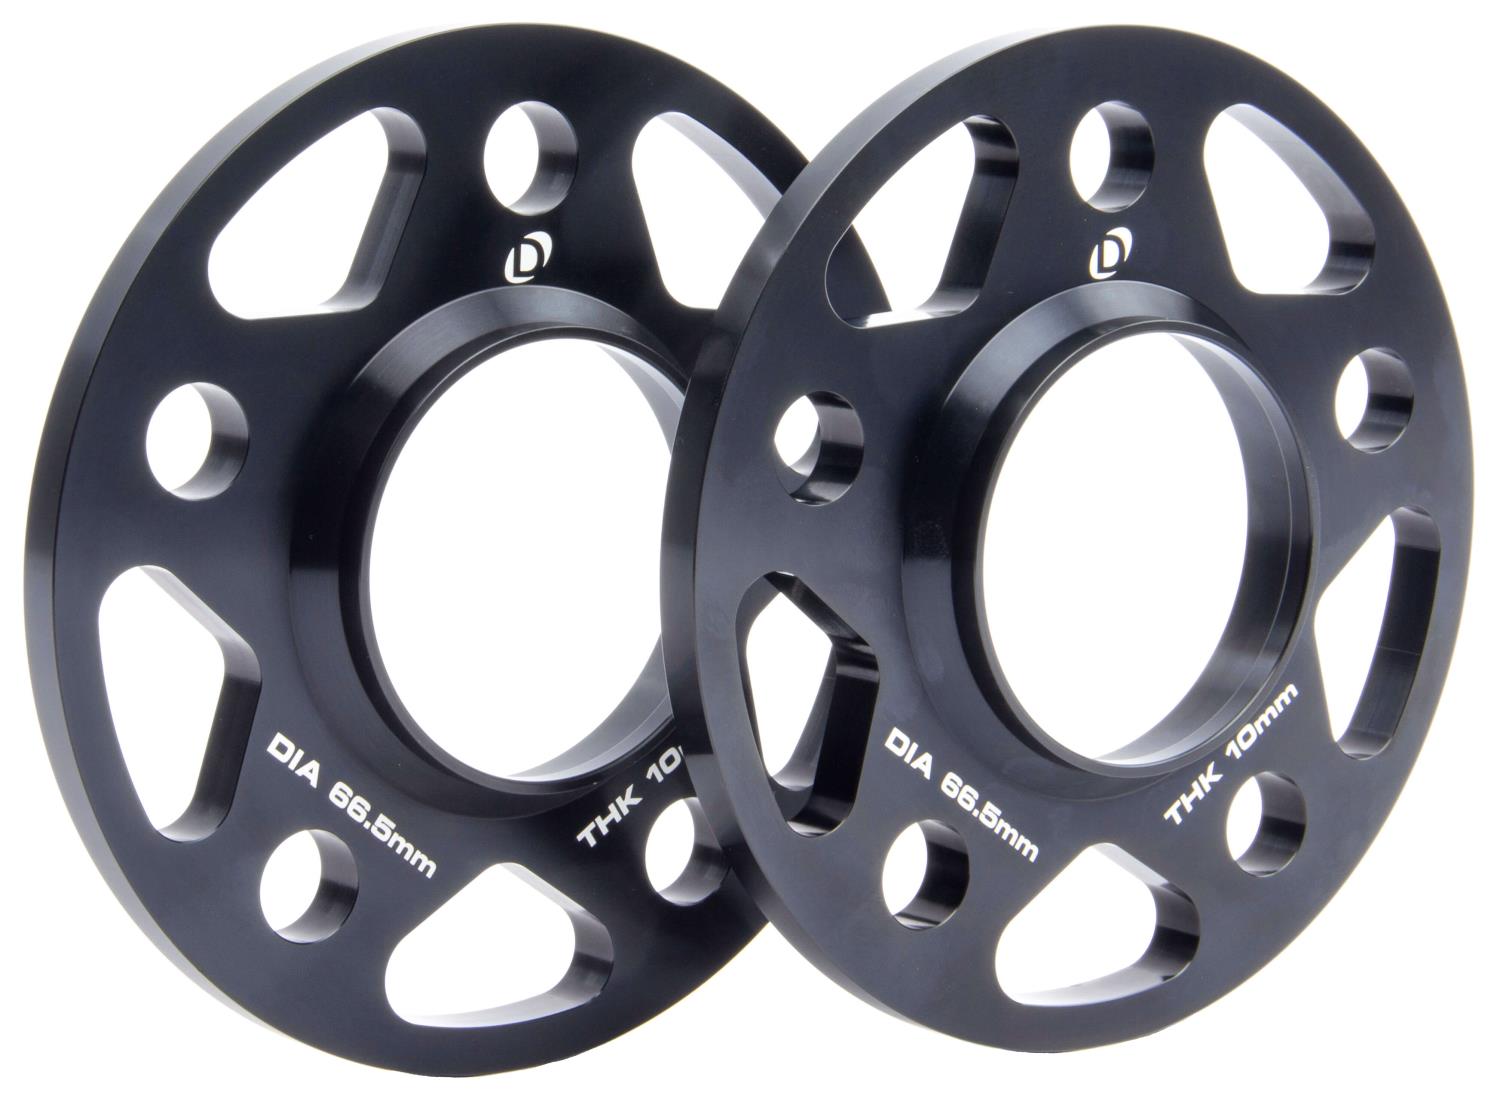 Machined Aluminum Wheel Spacers [10 mm Thick] for